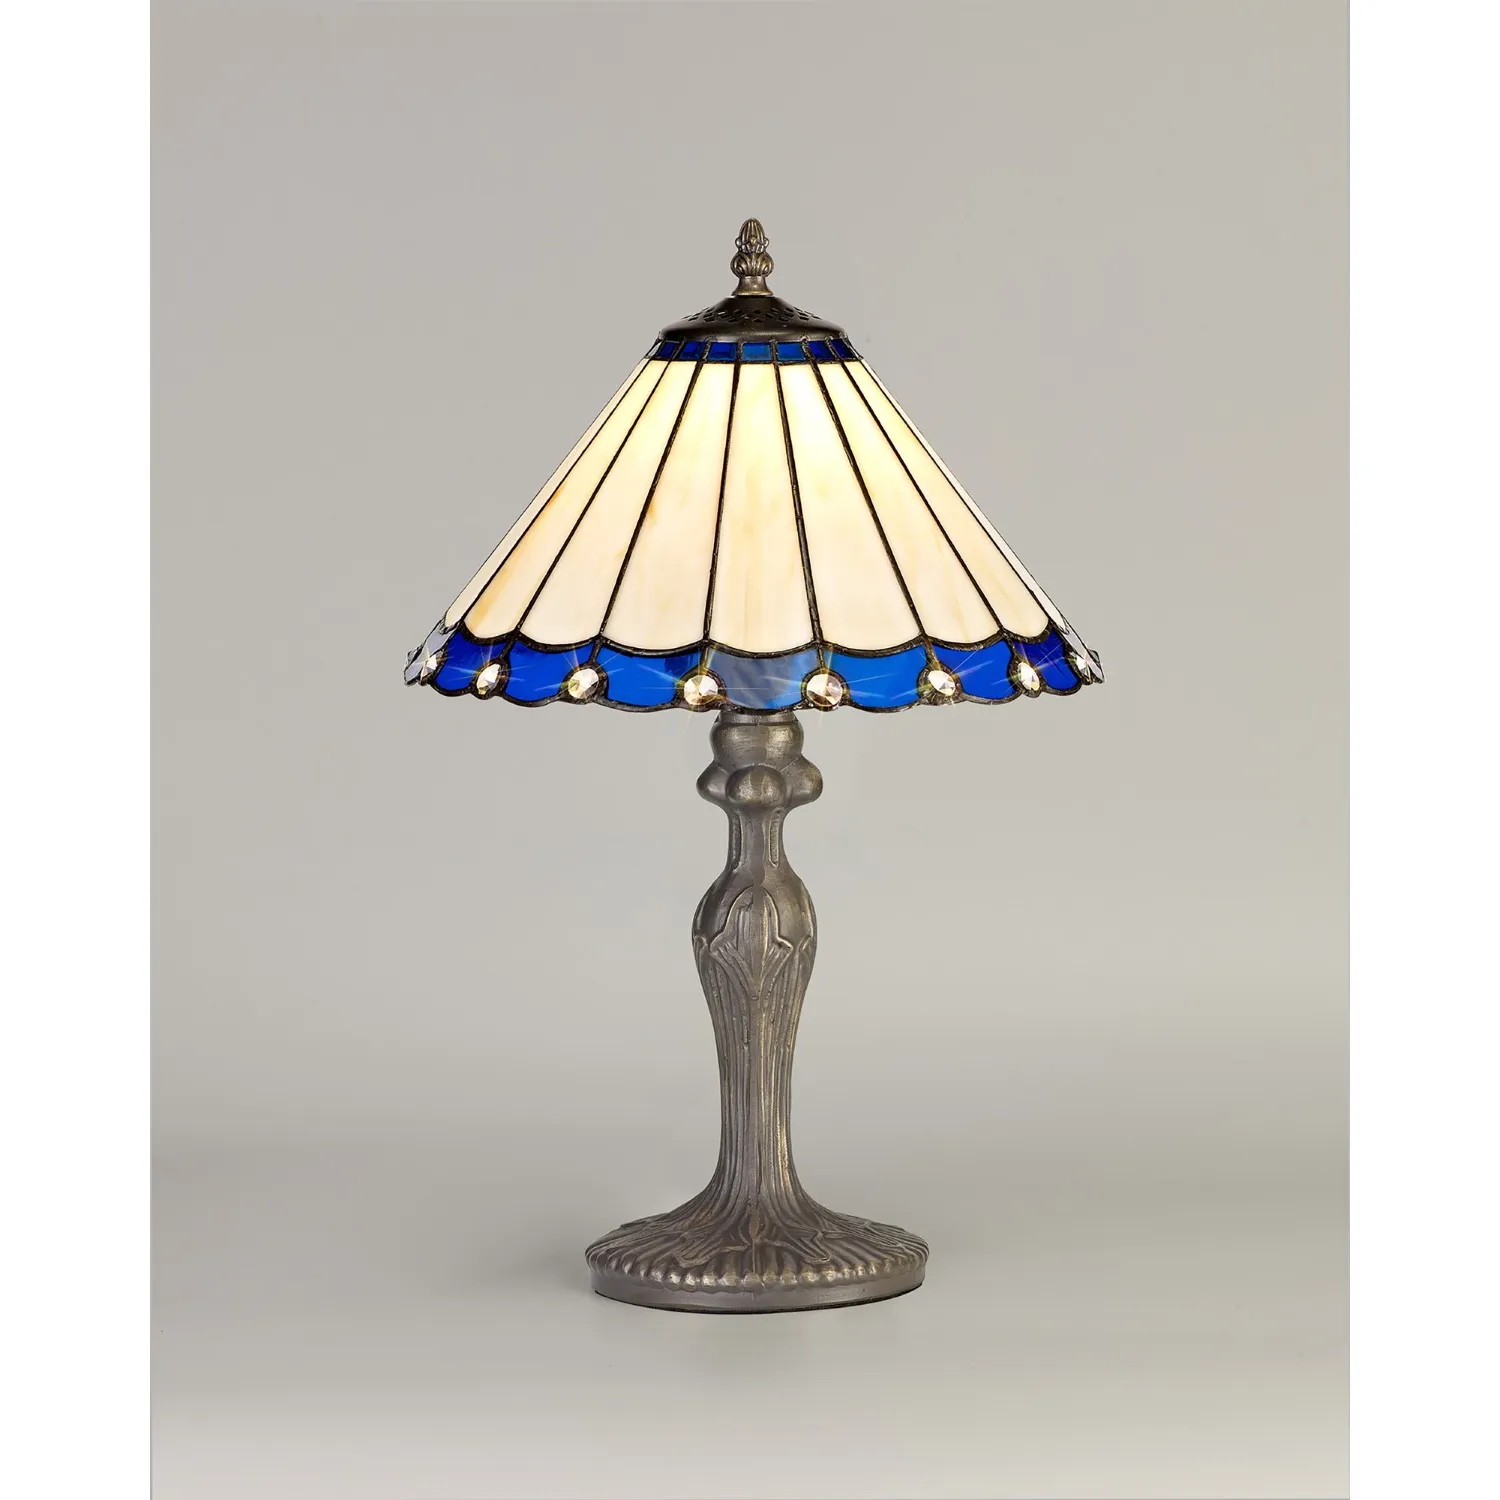 Ware 1 Light Curved Table Lamp E27 With 30cm Tiffany Shade, Blue Cream Crystal Aged Antique Brass